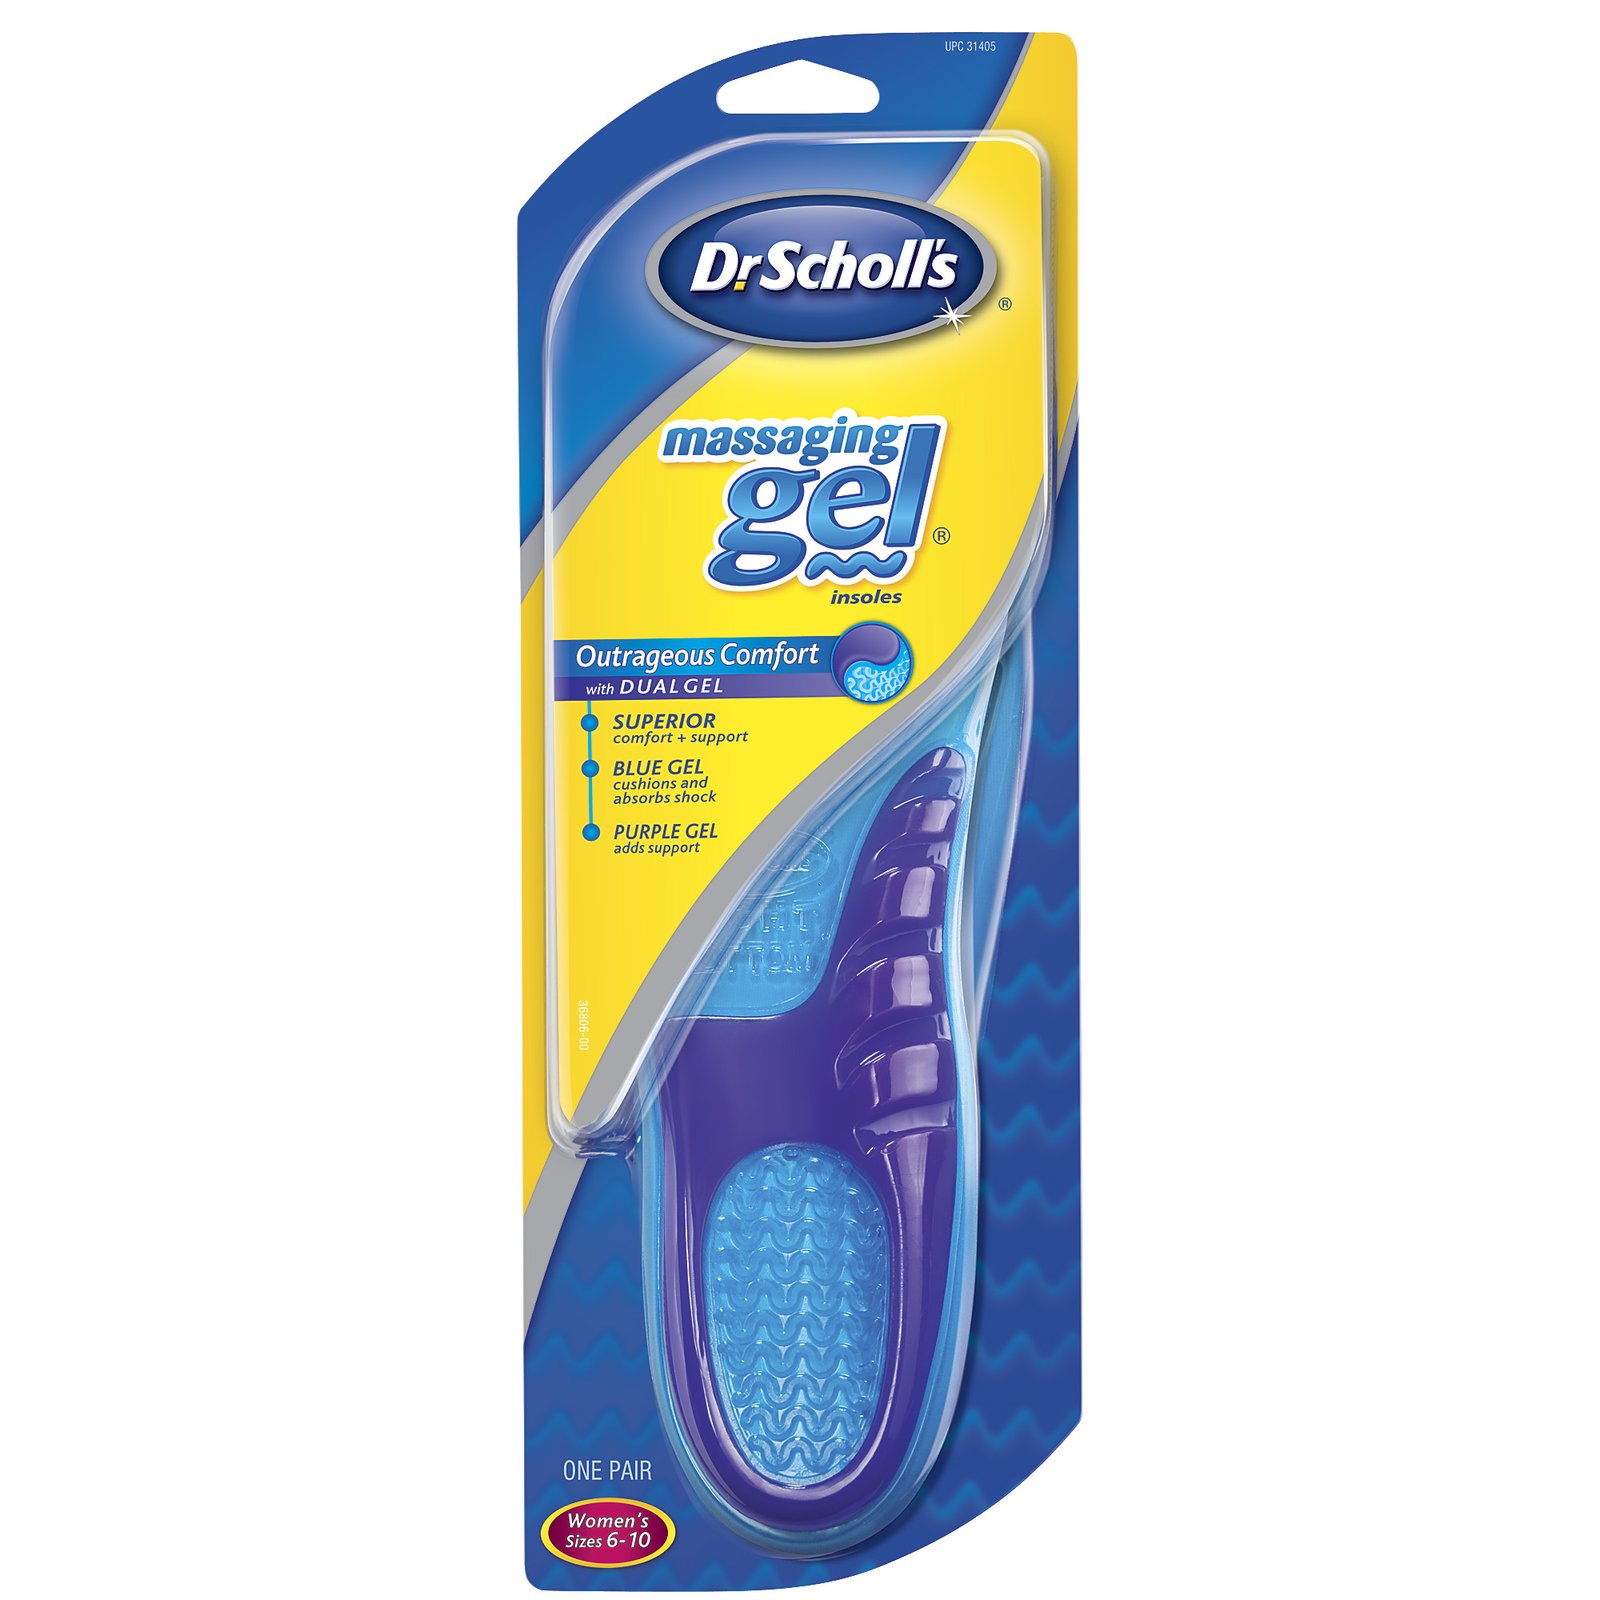 tender-allure-review-of-dr-scholl-s-massaging-gel-insoles-for-women